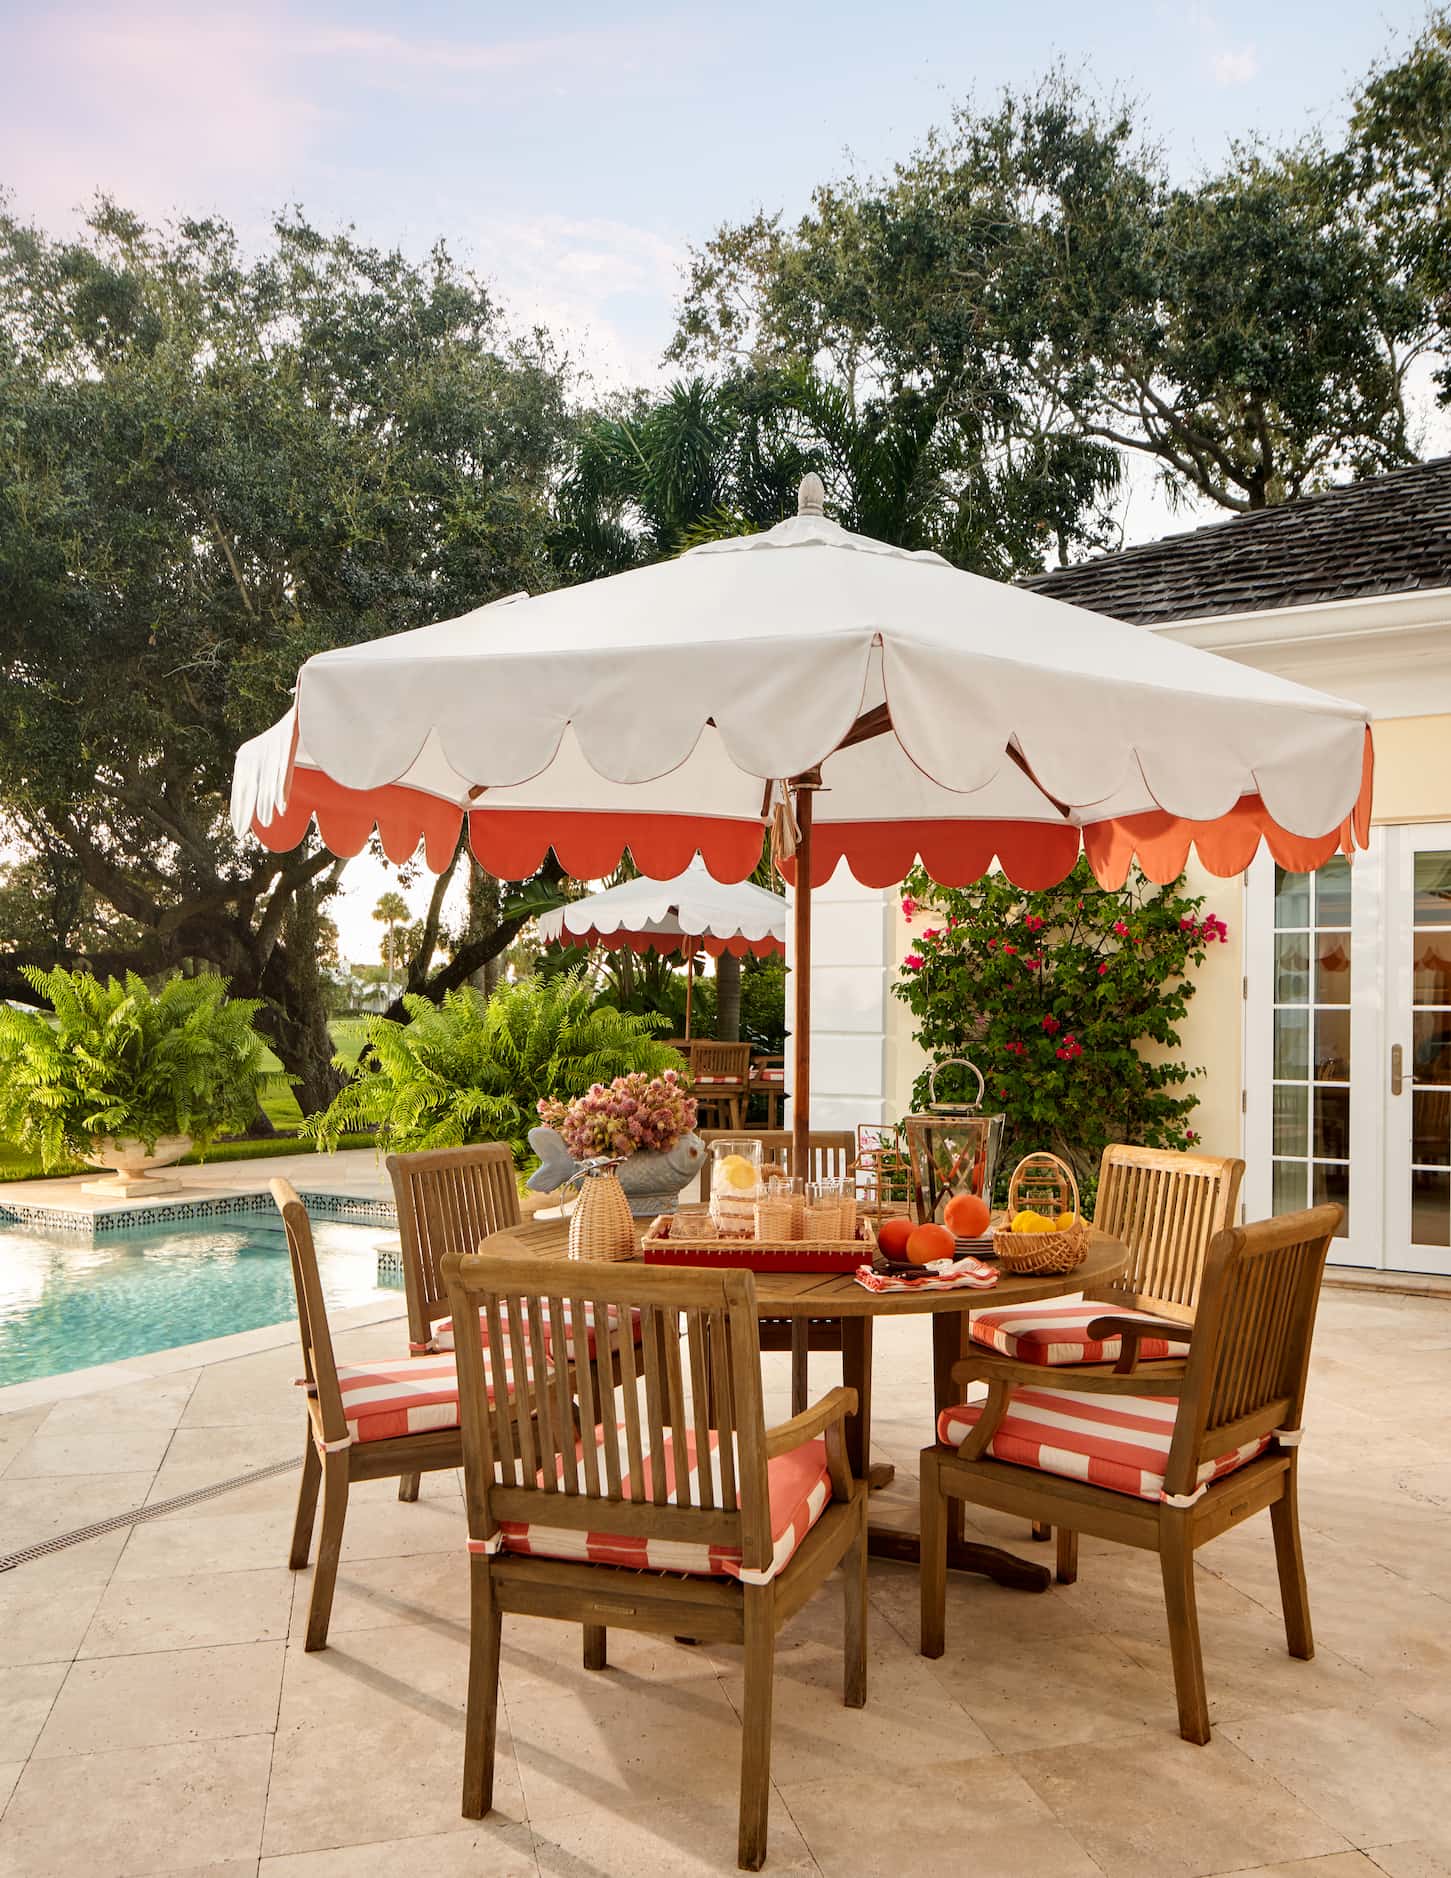 Wooden outdoor table with orange and white umbrella and orange stripe cushions on the chair